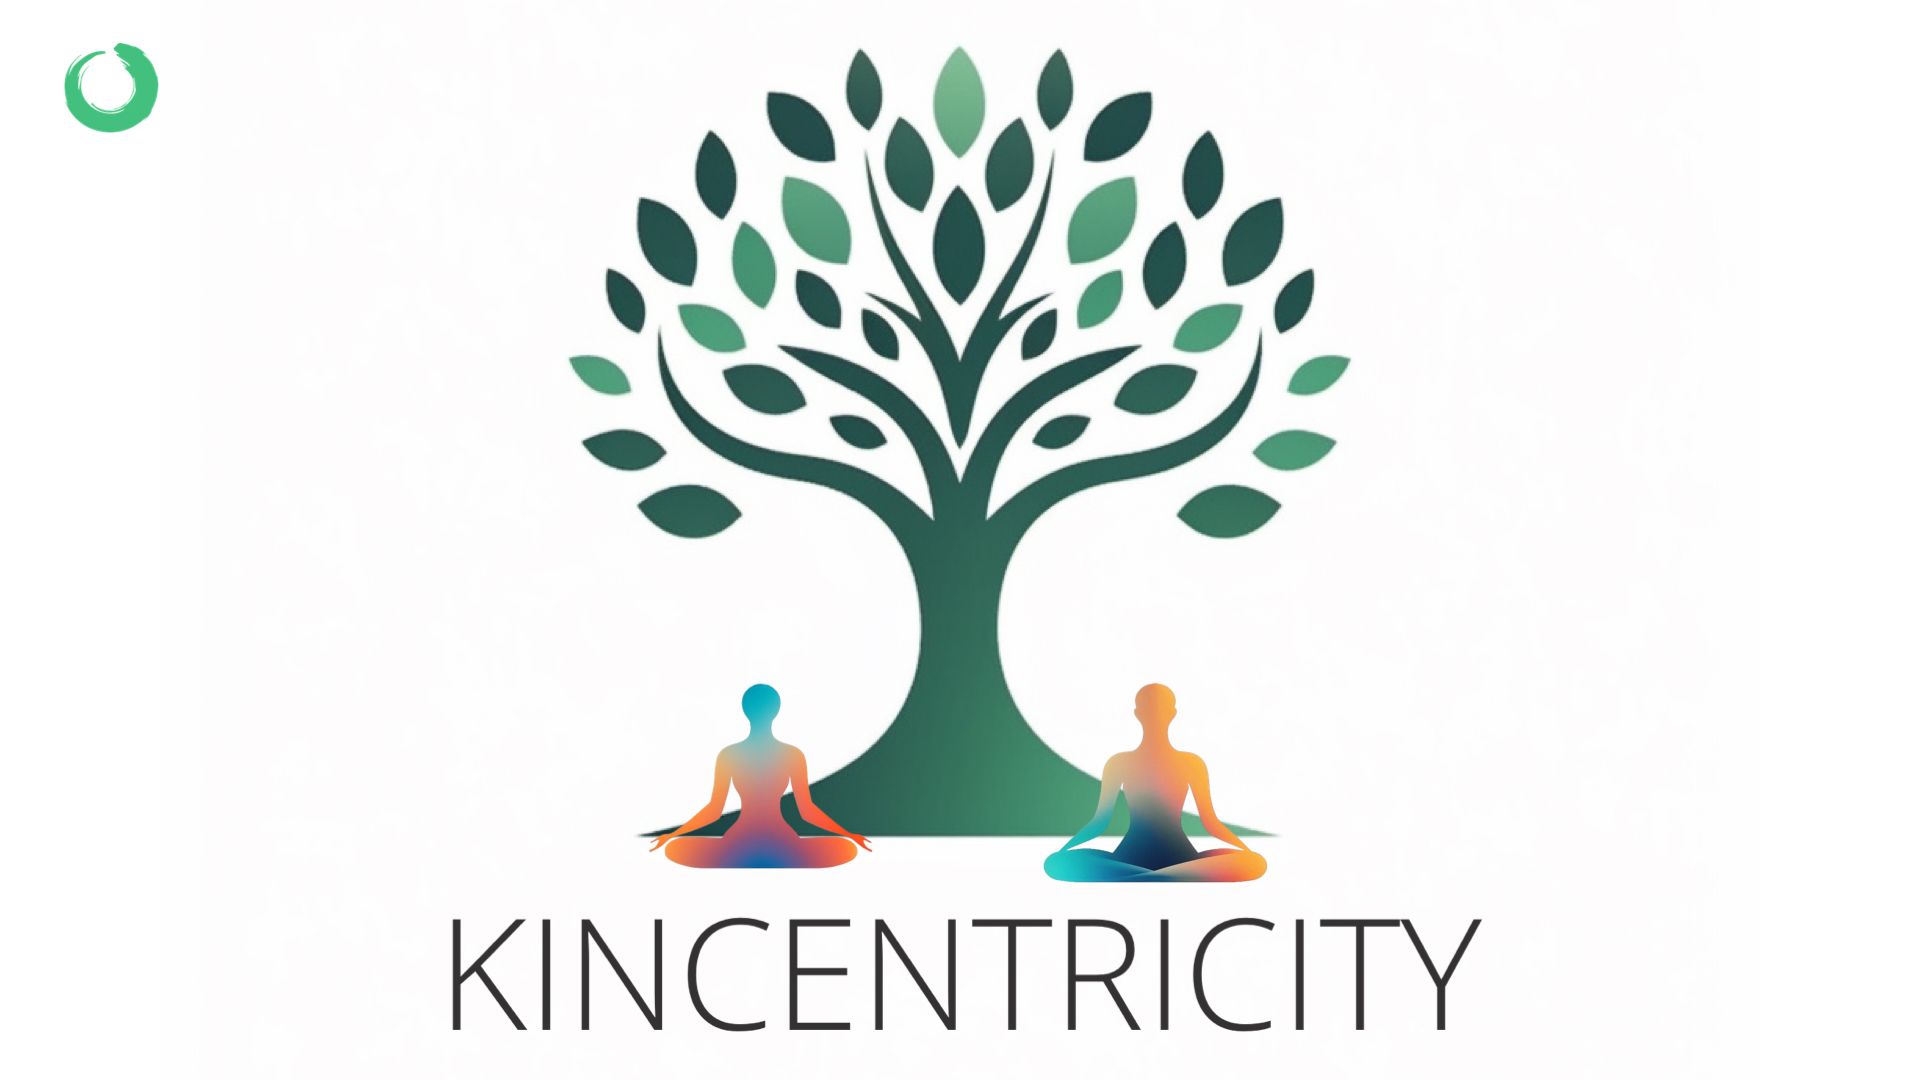 Some Content on Kincentricity